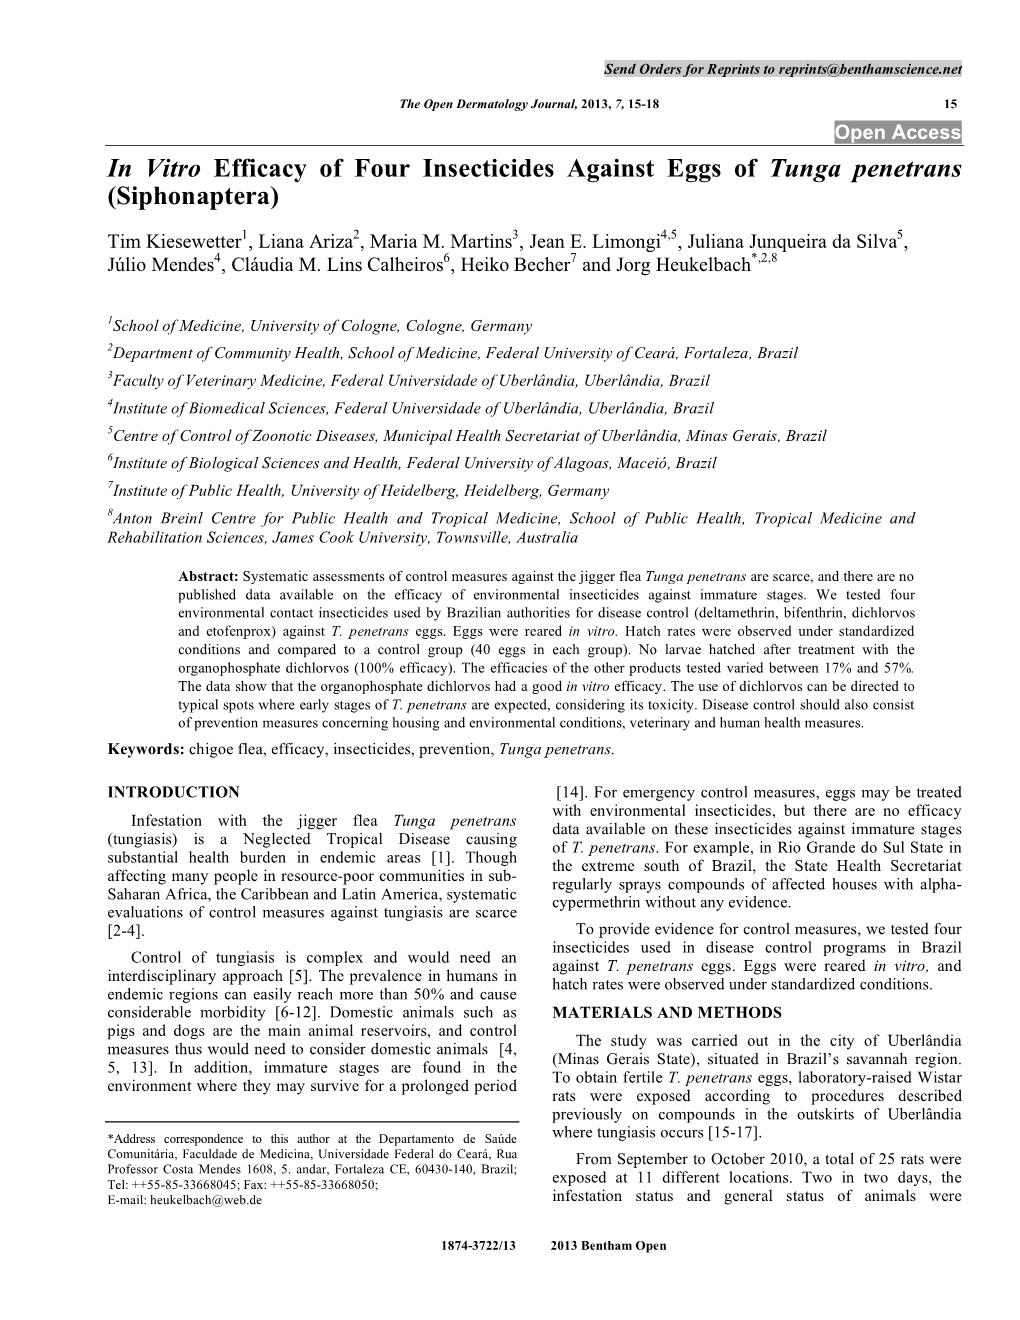 In Vitro Efficacy of Four Insecticides Against Eggs of Tunga Penetrans (Siphonaptera)